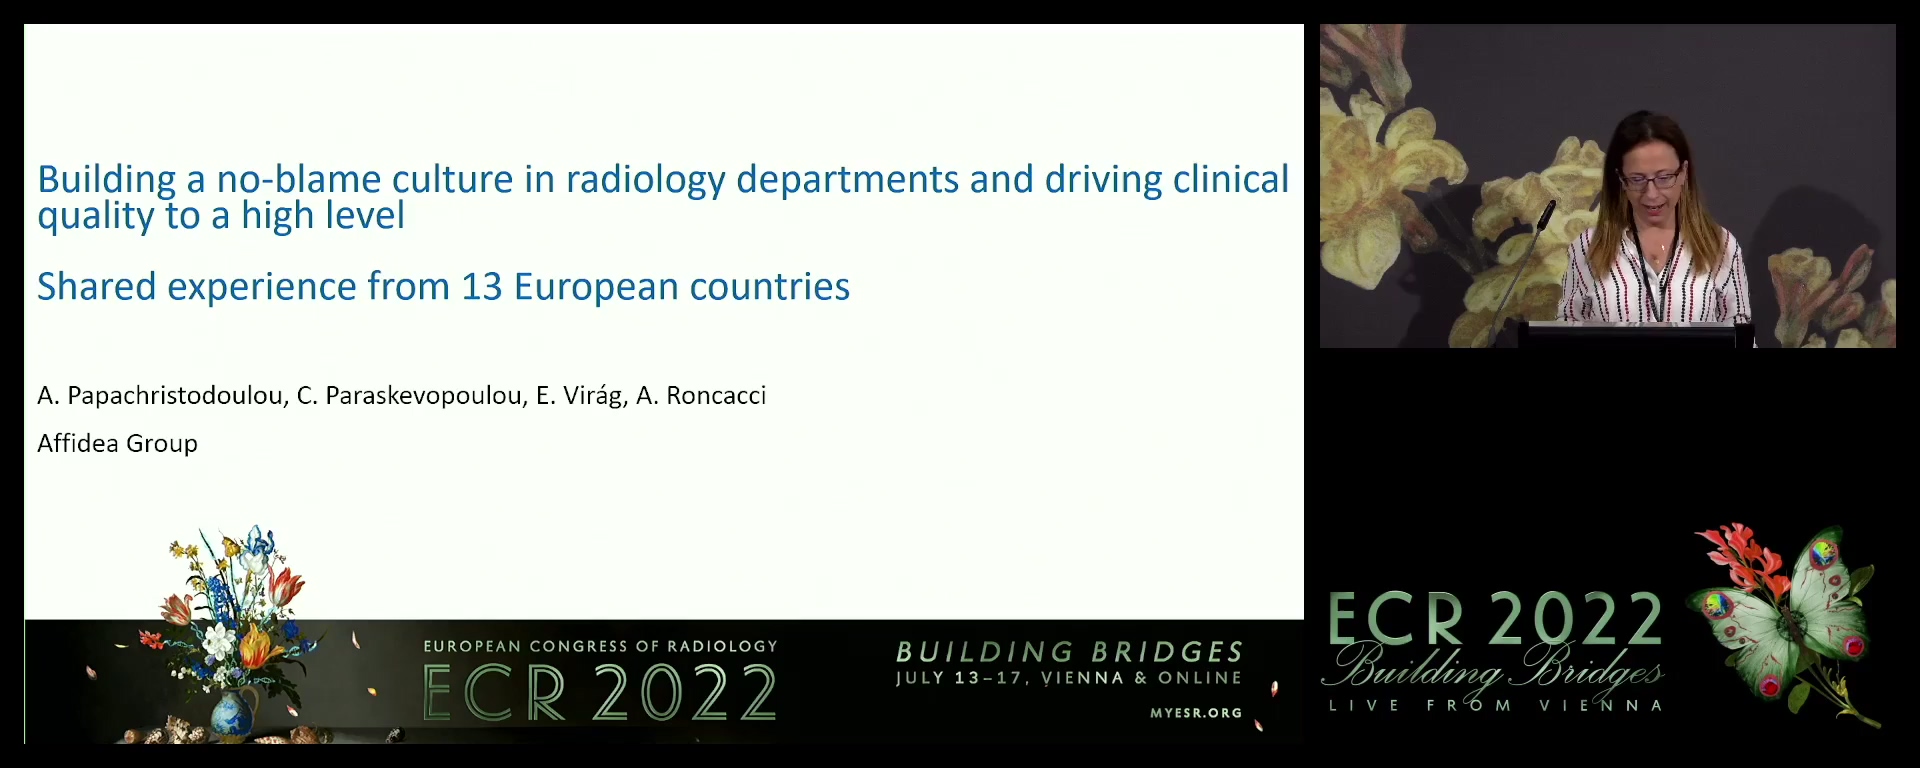 Building a no-blame culture in radiology departments and driving clinical quality to a high level: shared experience from 13 European countries - Athanasia Papachristodoulou, Budapest / HU